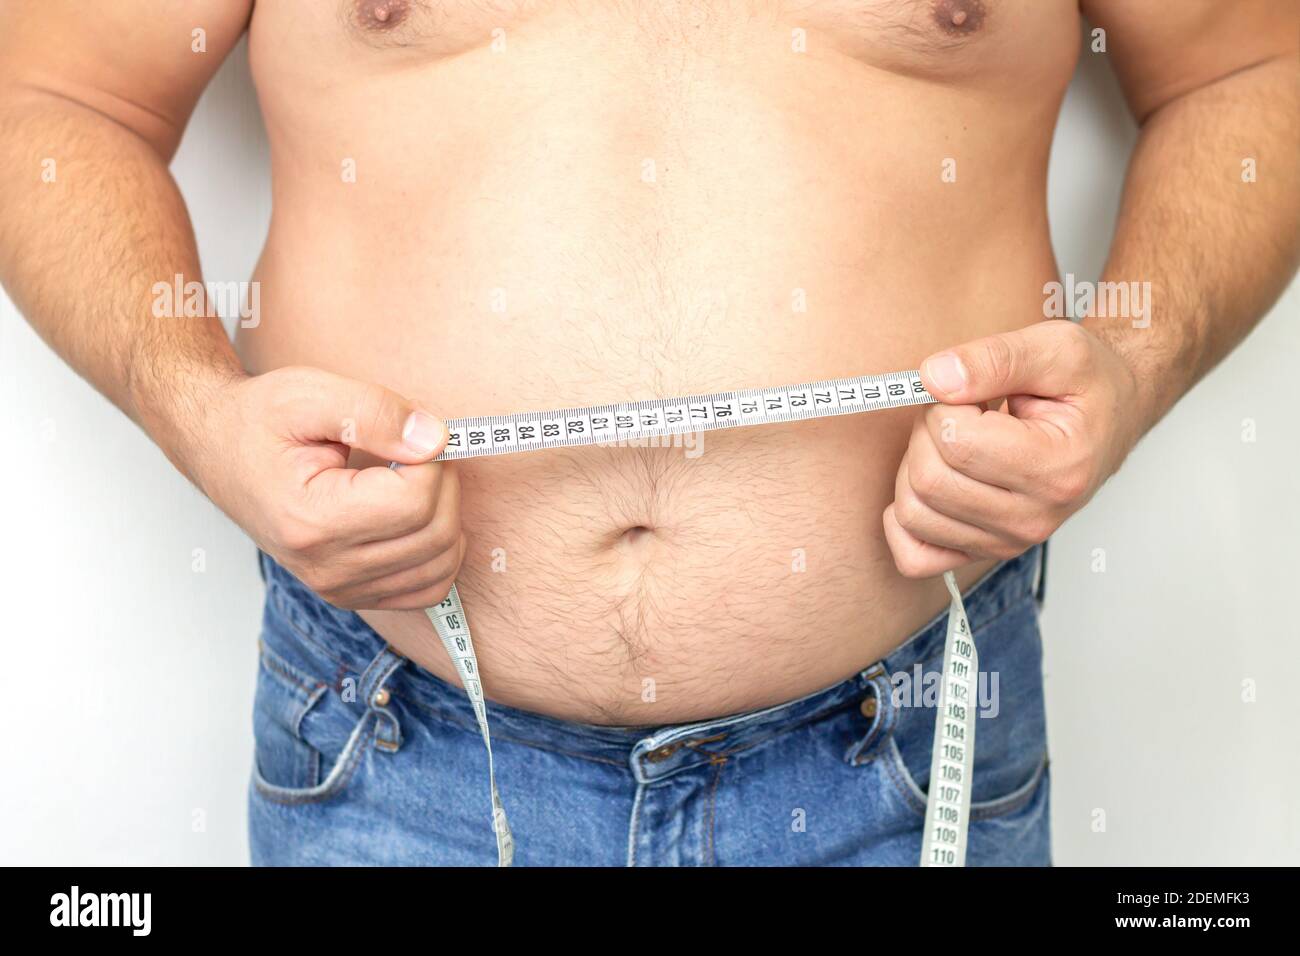 Fat man with big stomach wering jeans holding his measuring tape Stock Photo